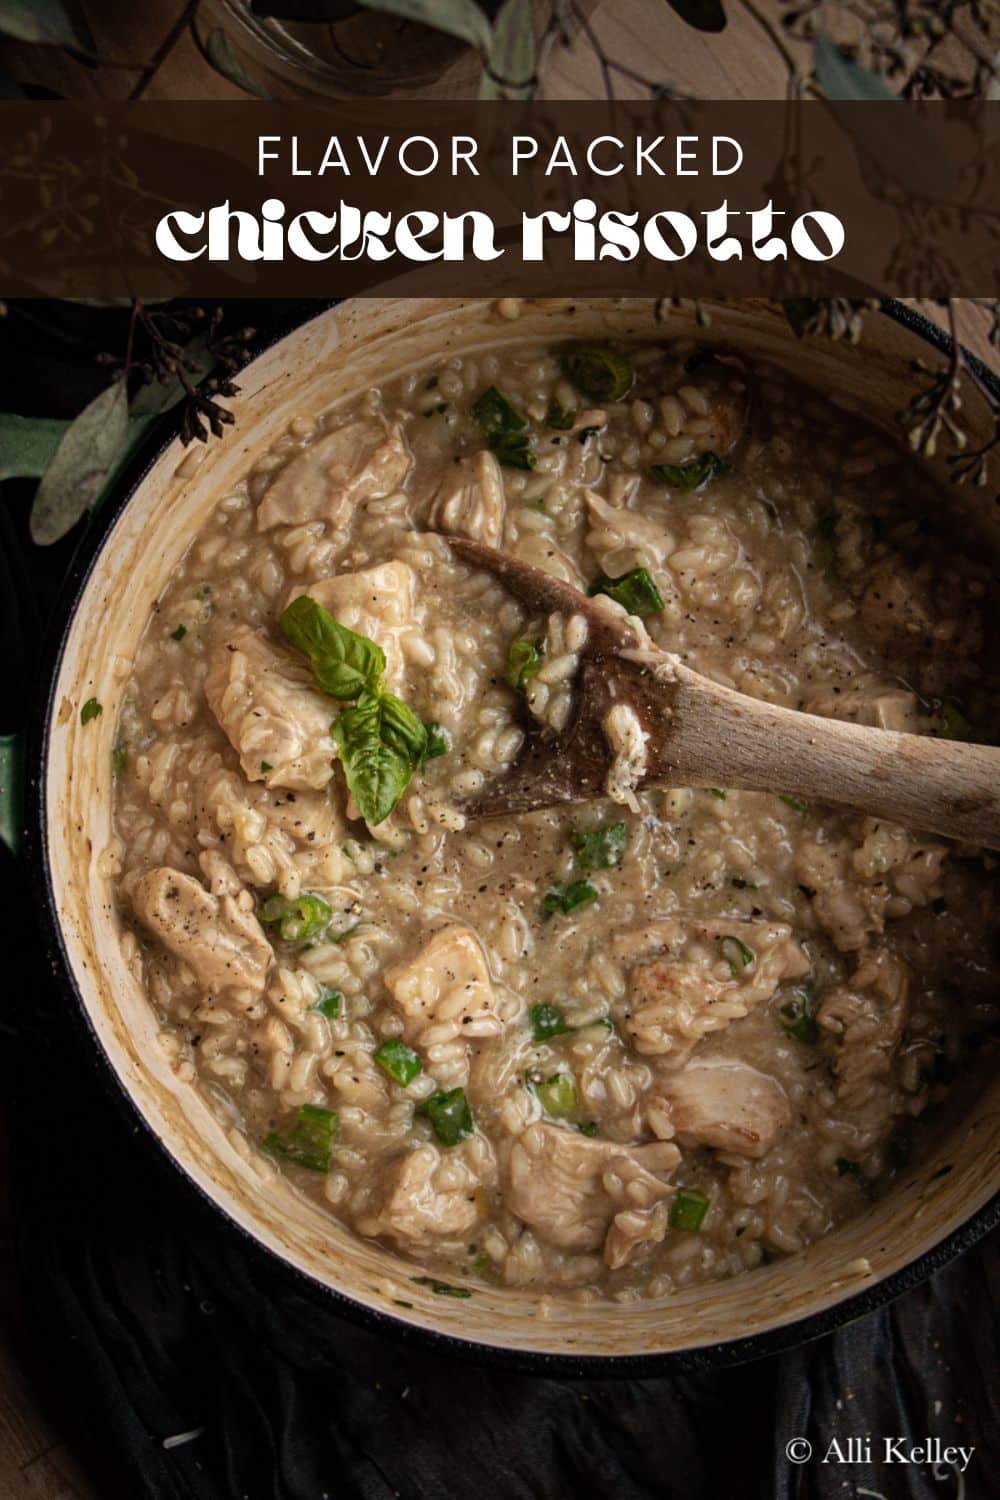 If you're looking for a delicious weeknight dinner, you have to try this chicken risotto recipe! Flavorful and packed with tender chicken - this creamy chicken risotto recipe is pure comfort food at its finest! In just 30 minutes, you can have this delicious meal on the table in no time.